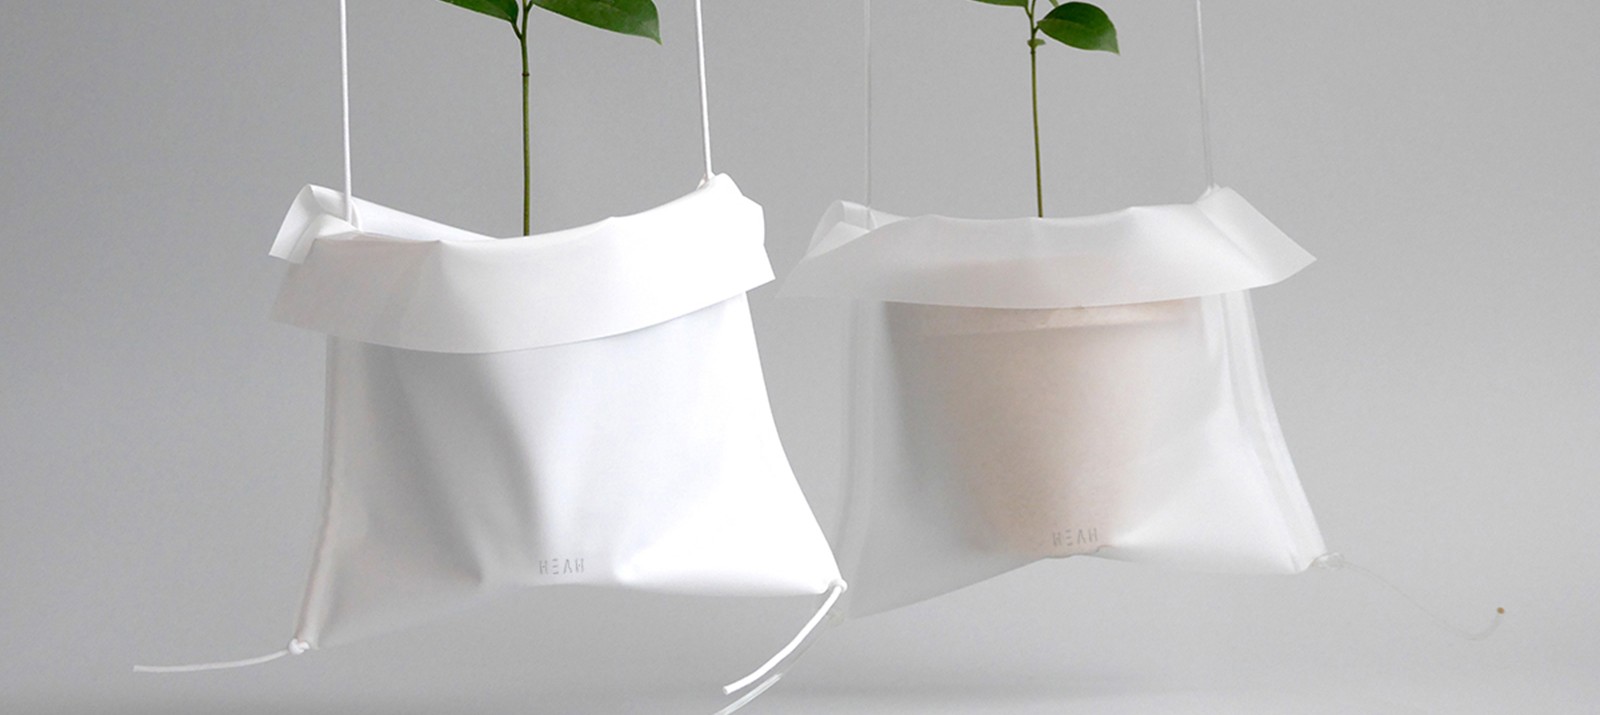 HEAN Pot Cradle is the best hanging planter for a tiny apartment.